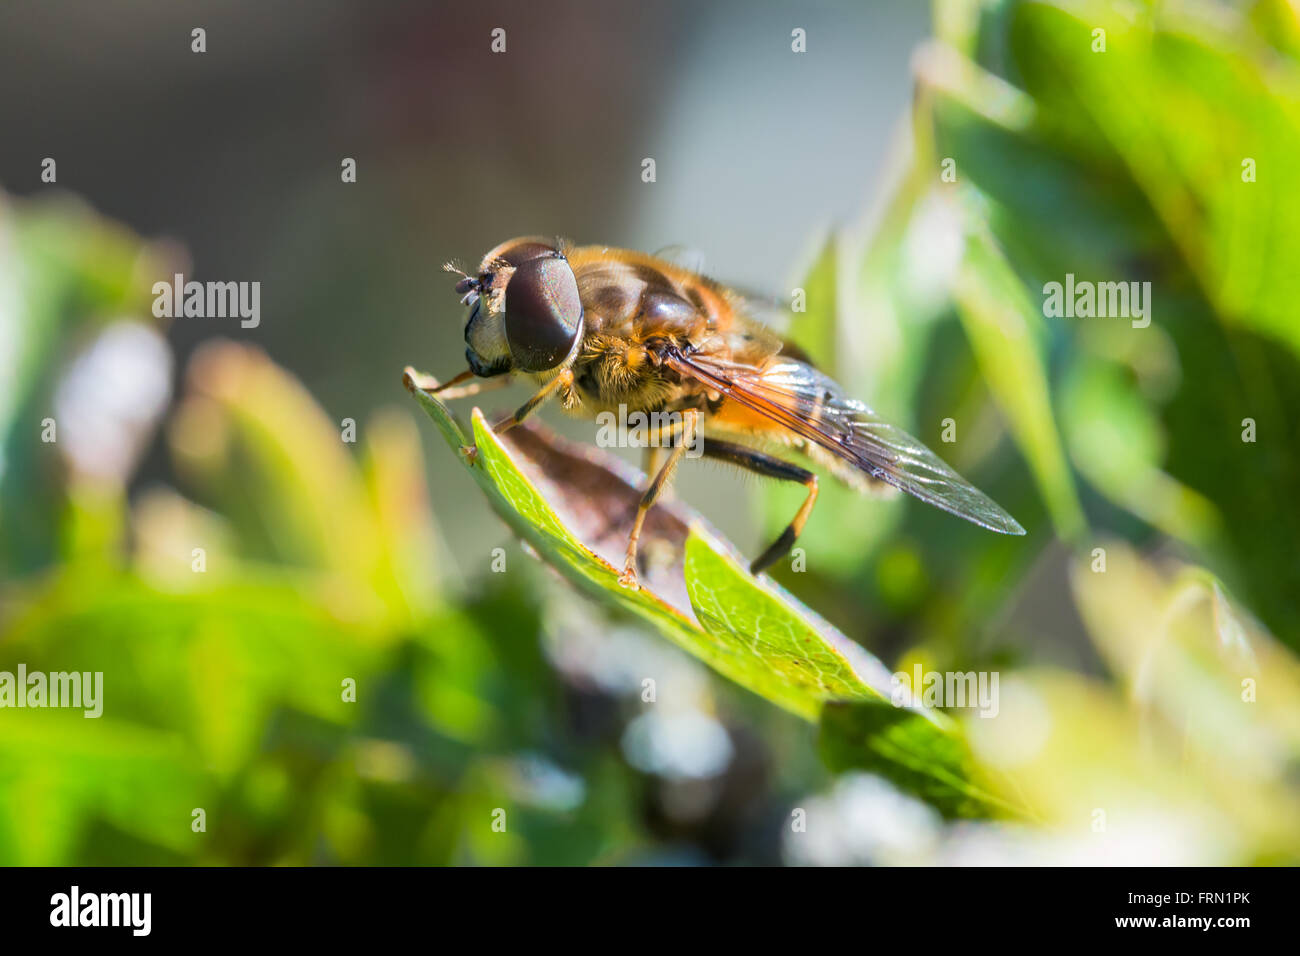 Hoverfly Myathropa florea resting on a leaf known as a Wasp mimic fly Stock Photo